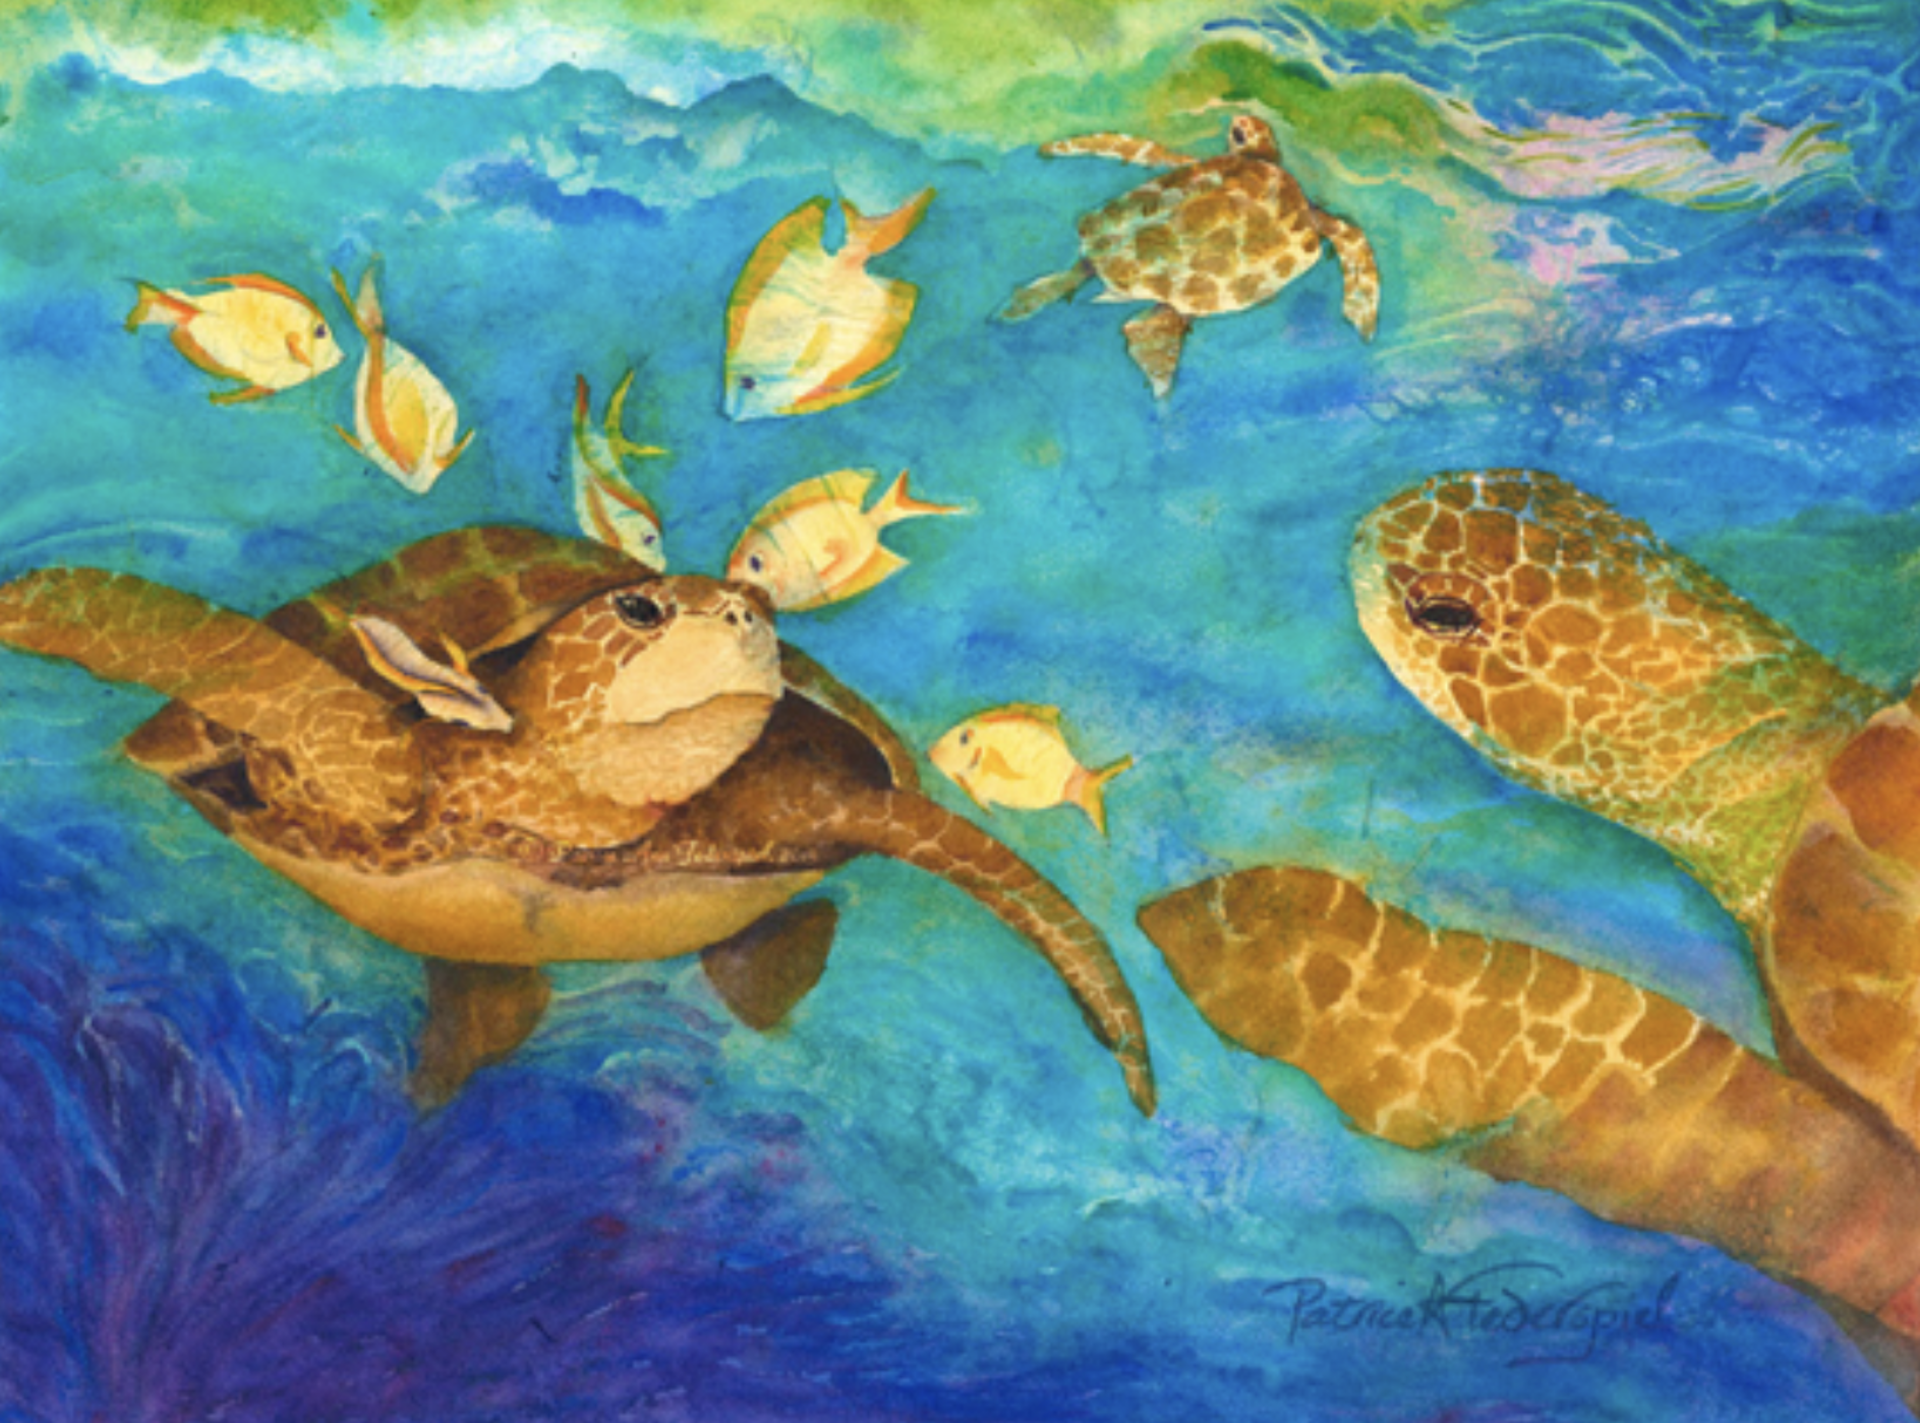 At the Turtle Cleaning Station by Patrice Ann Federspiel